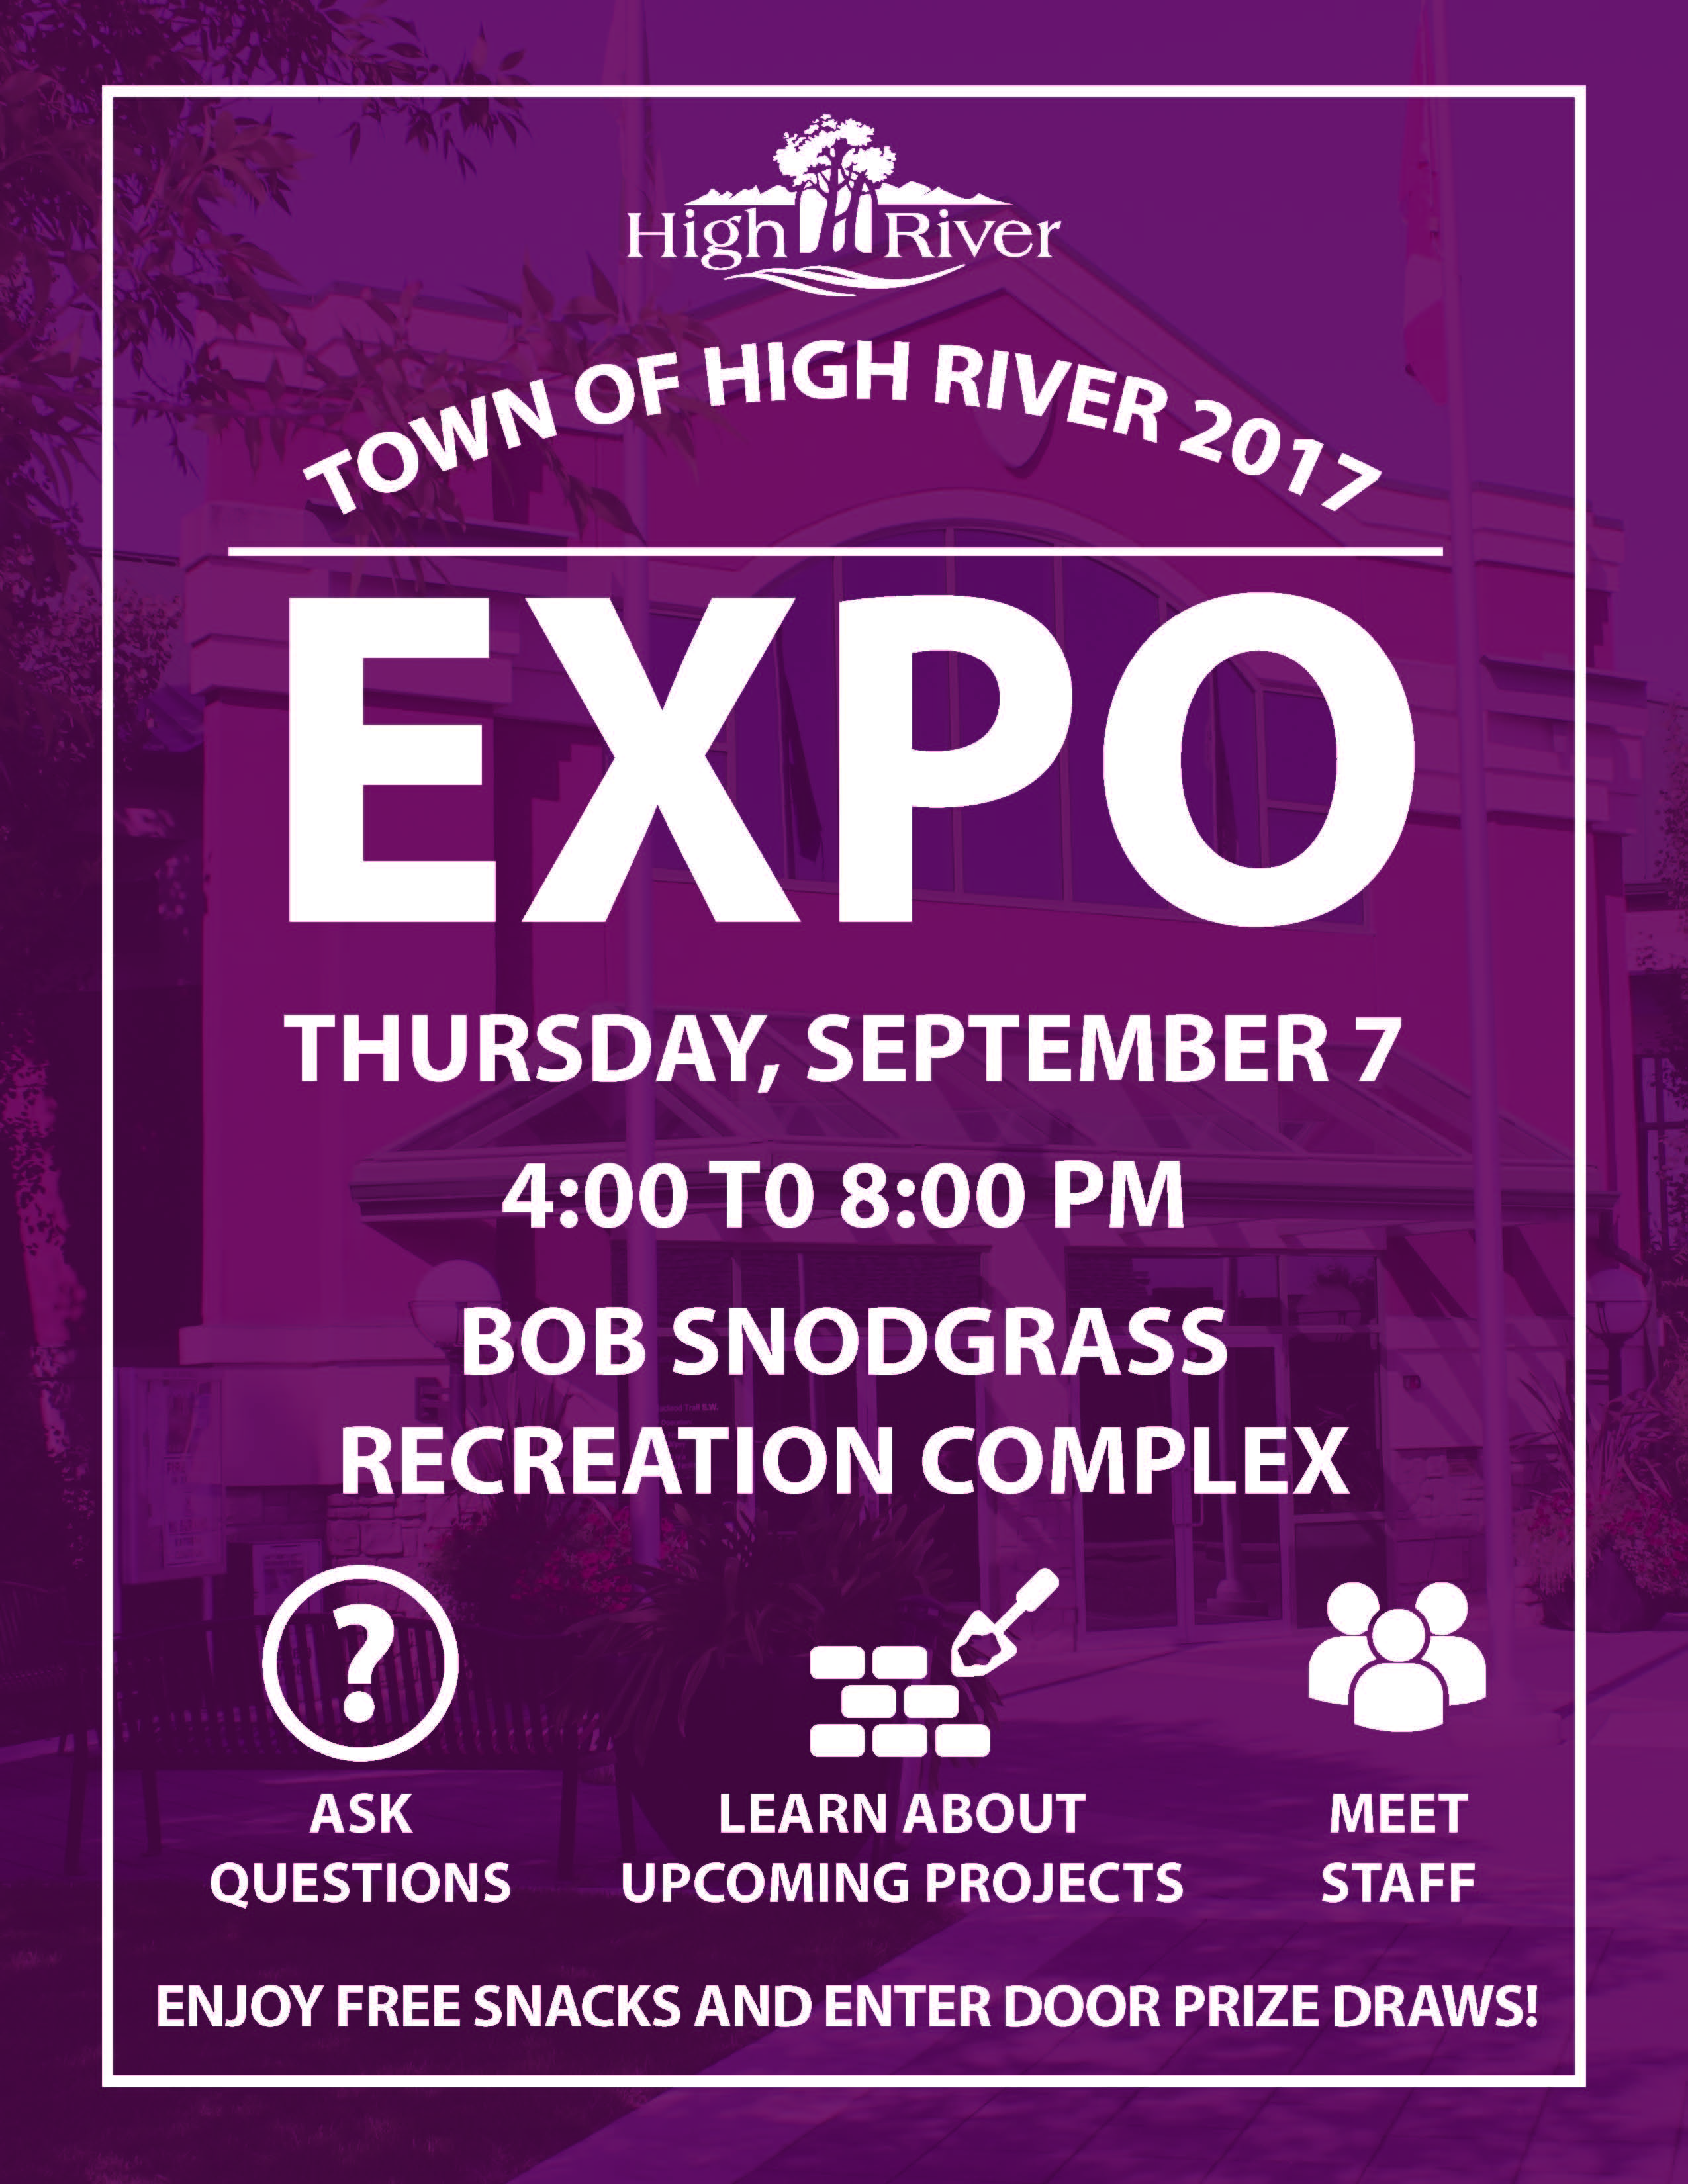 Town of High River Expo to be Held on September 7